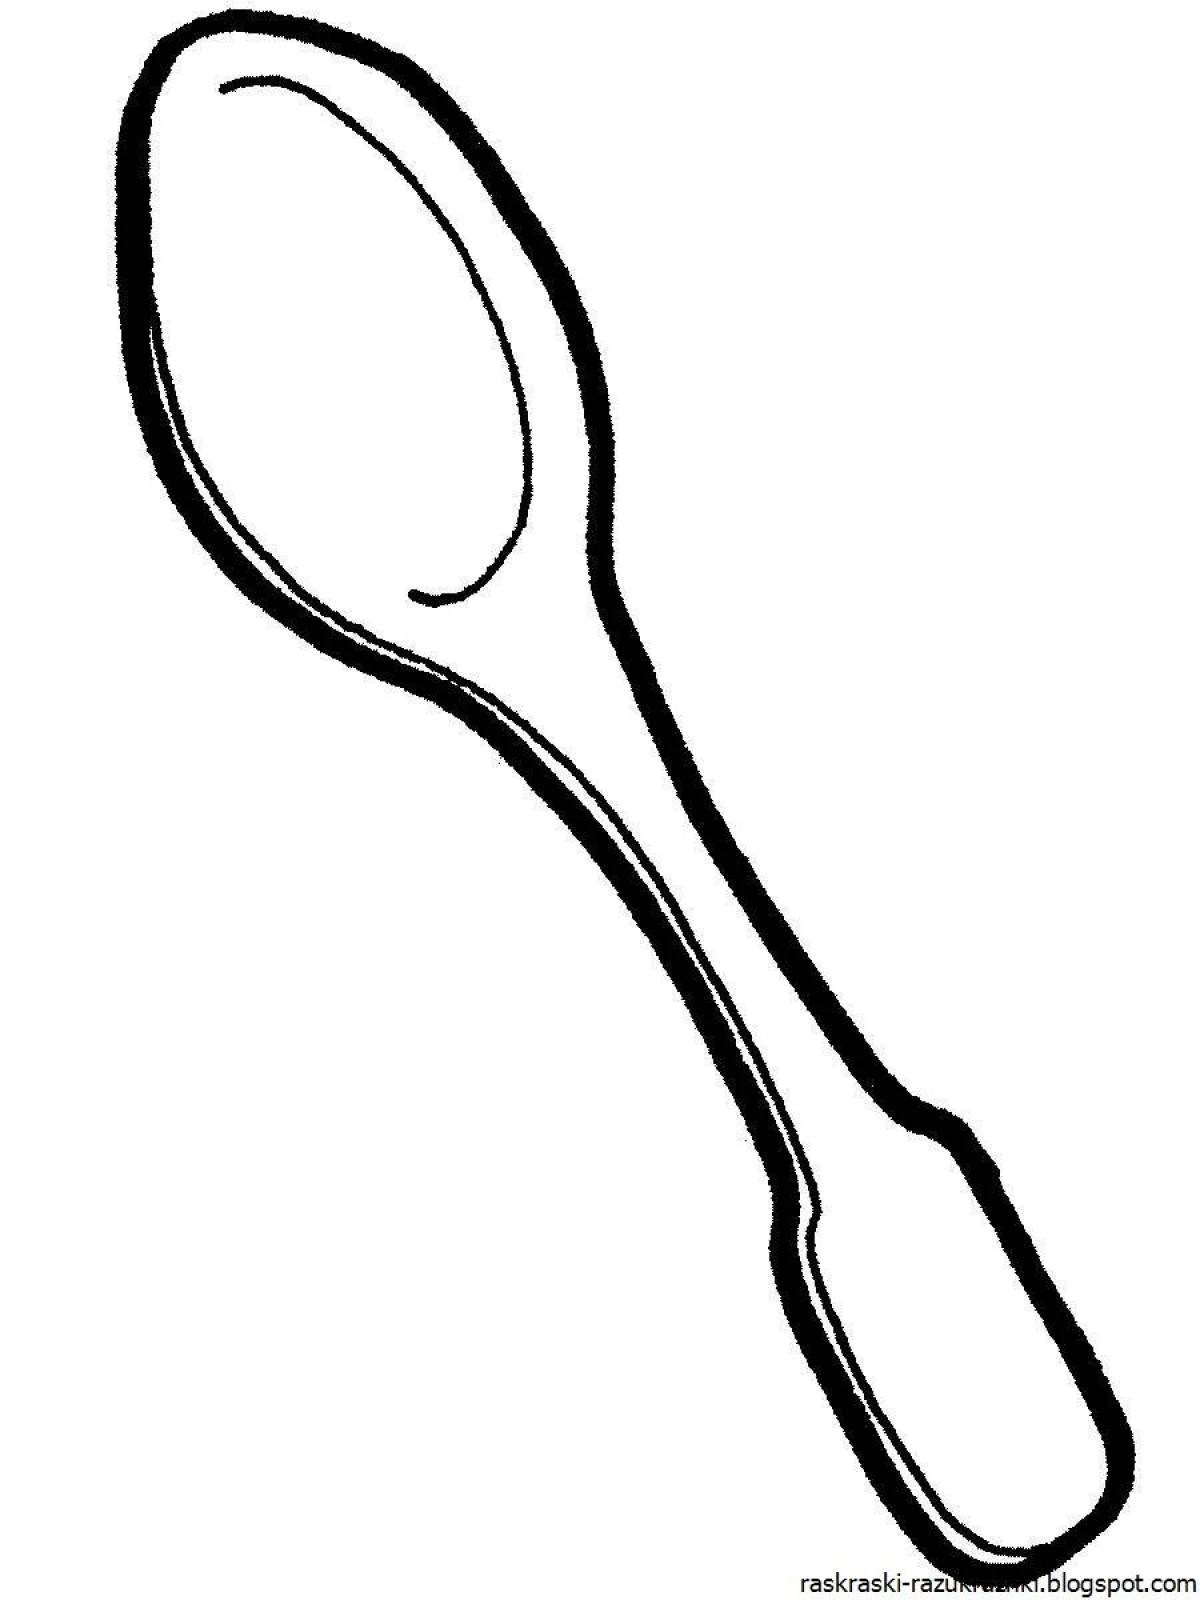 Dishes spoon #11